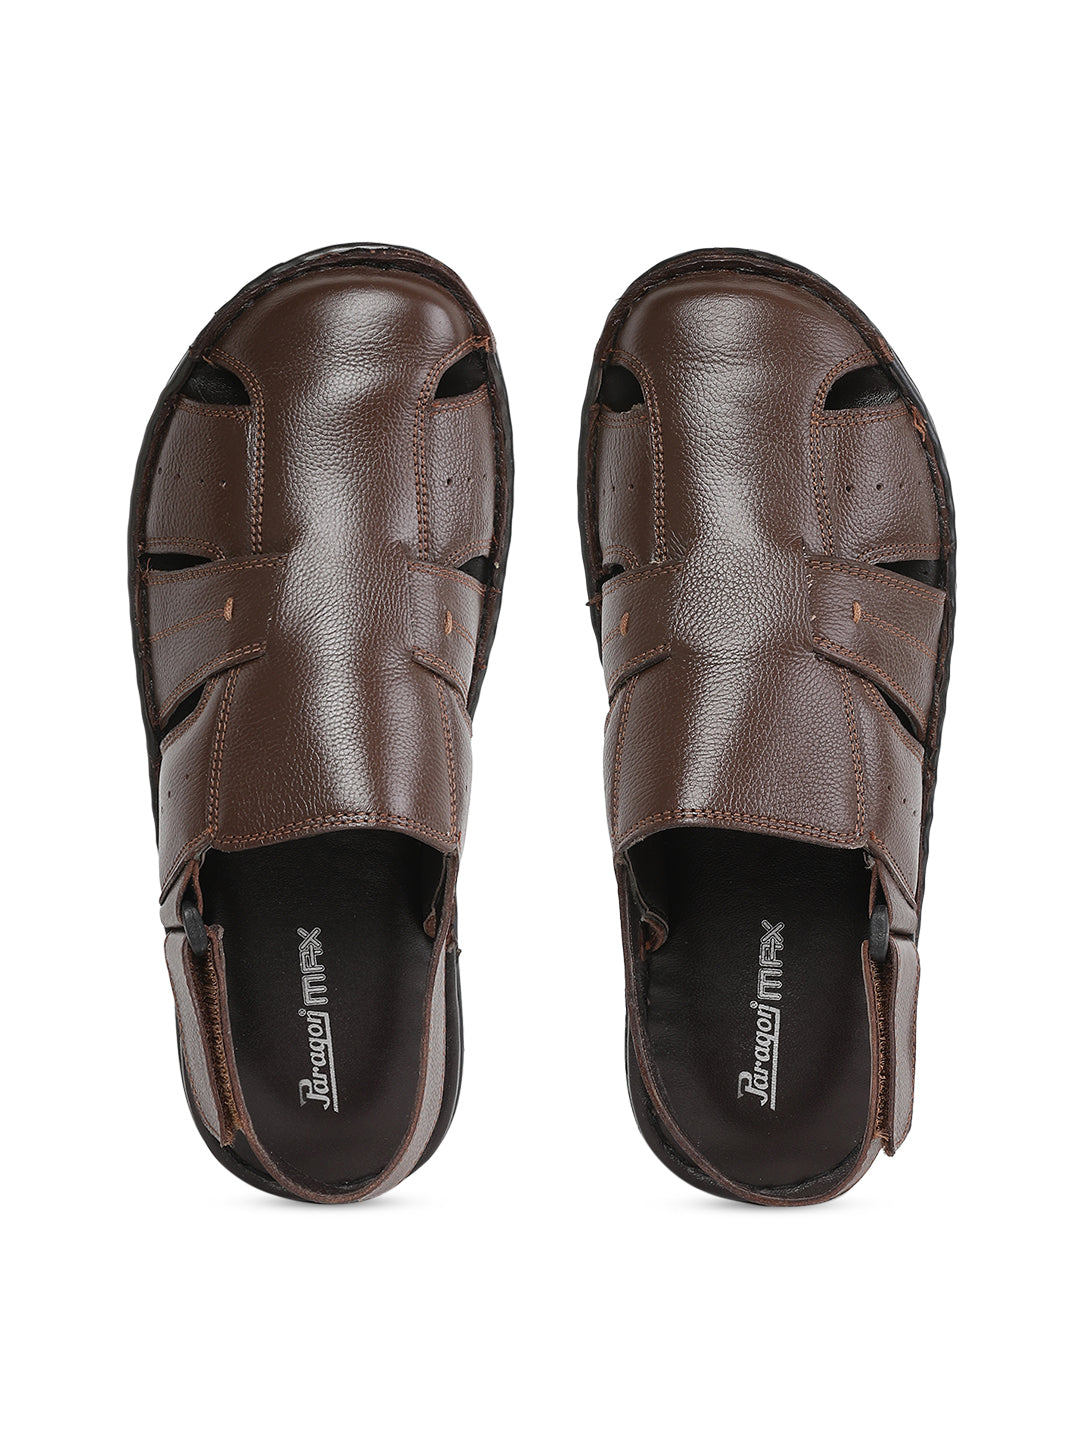 Paragon  R10308G Men Stylish Sandals | Comfortable Sandals for Daily Outdoor Use | Casual Formal Sandals with Cushioned Soles